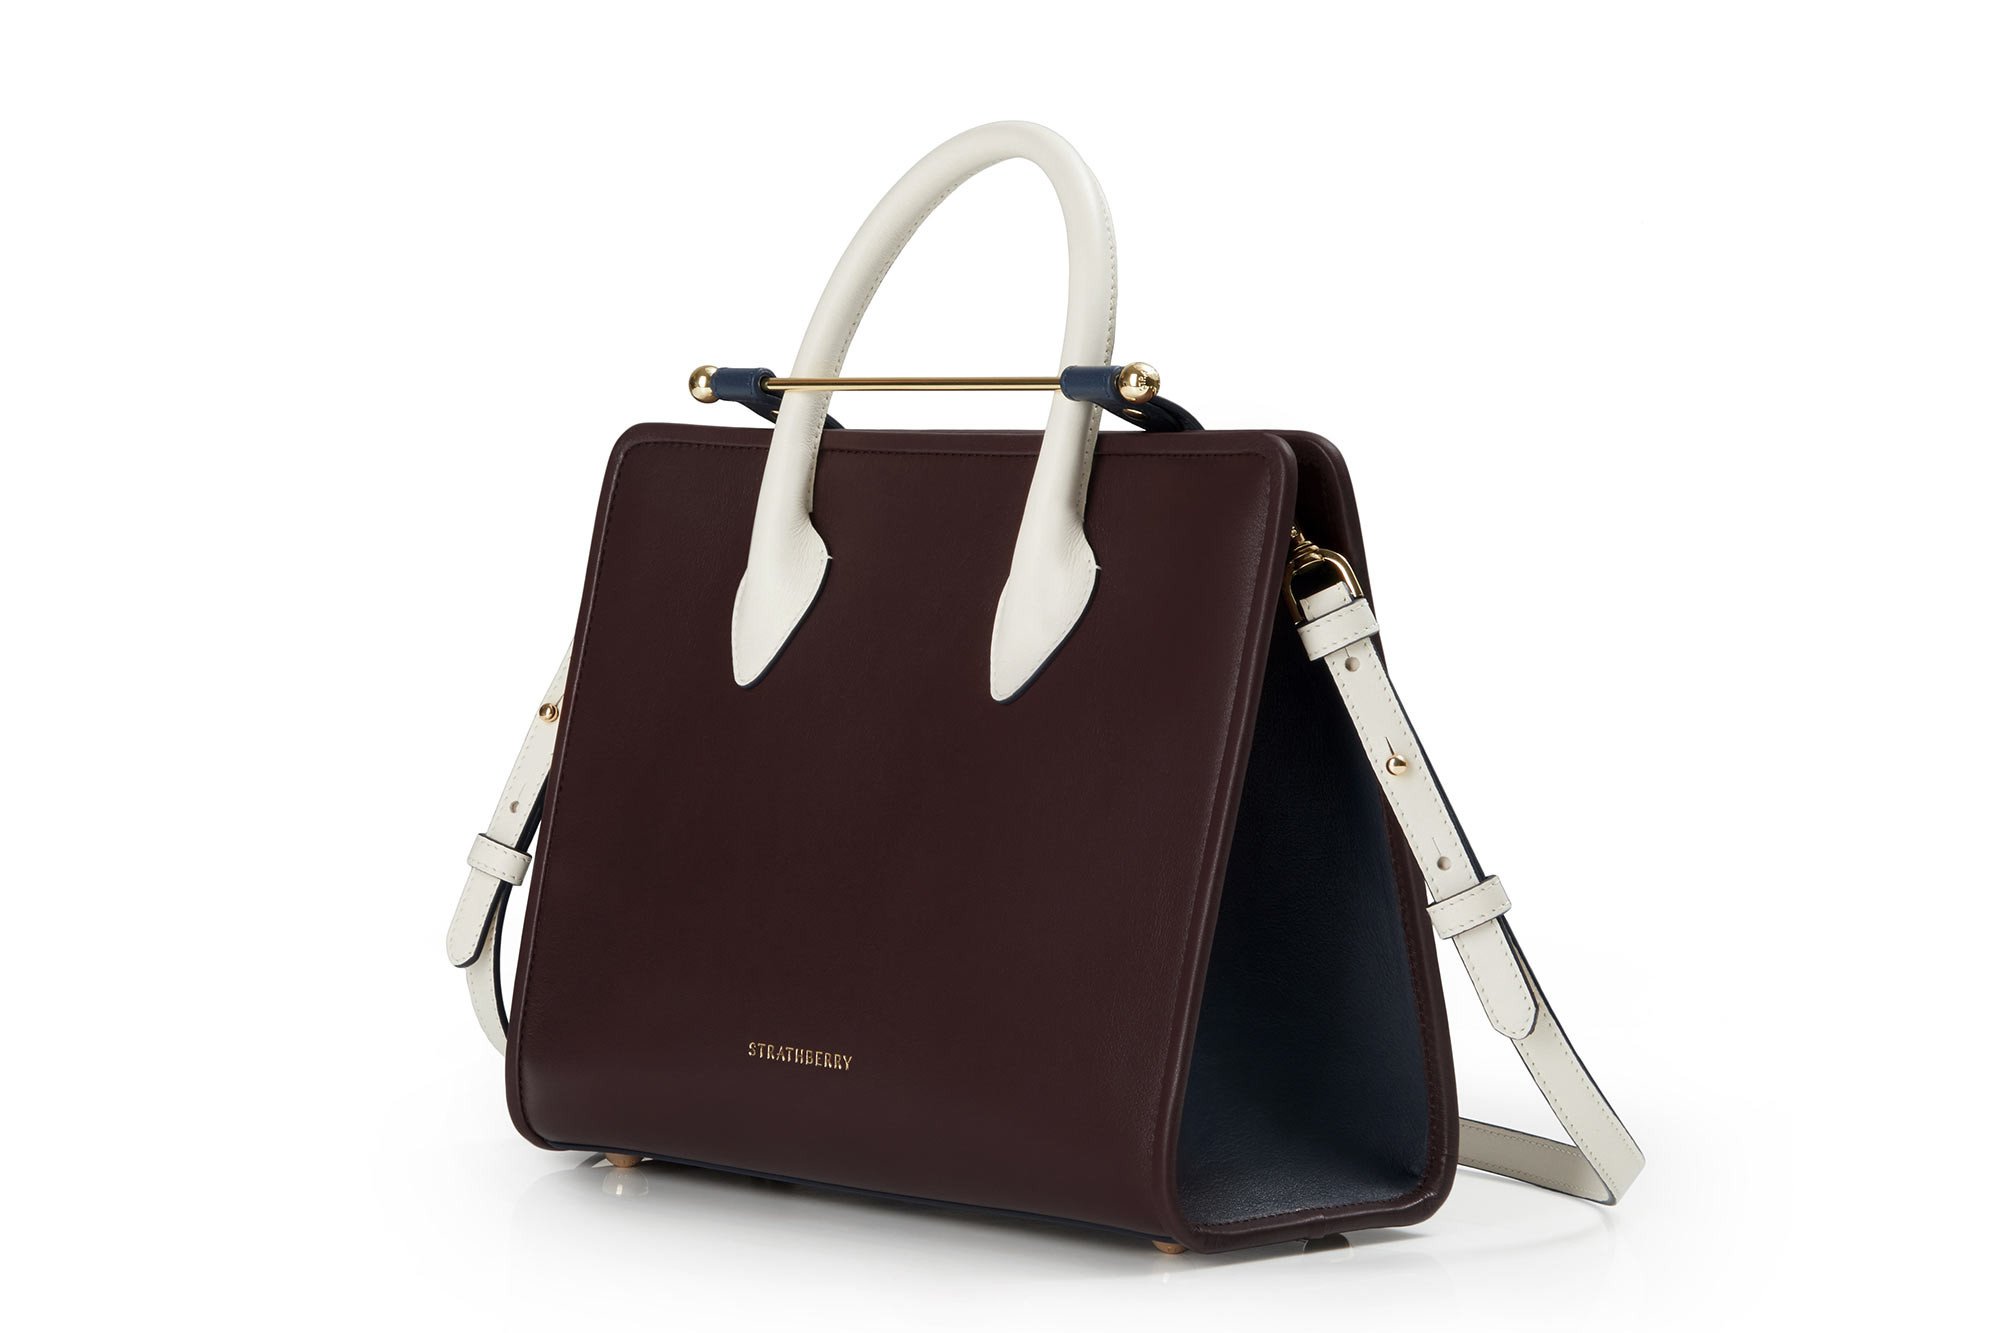 The Strathberry Midi Tote - Top Handle Leather Tote Bag - White